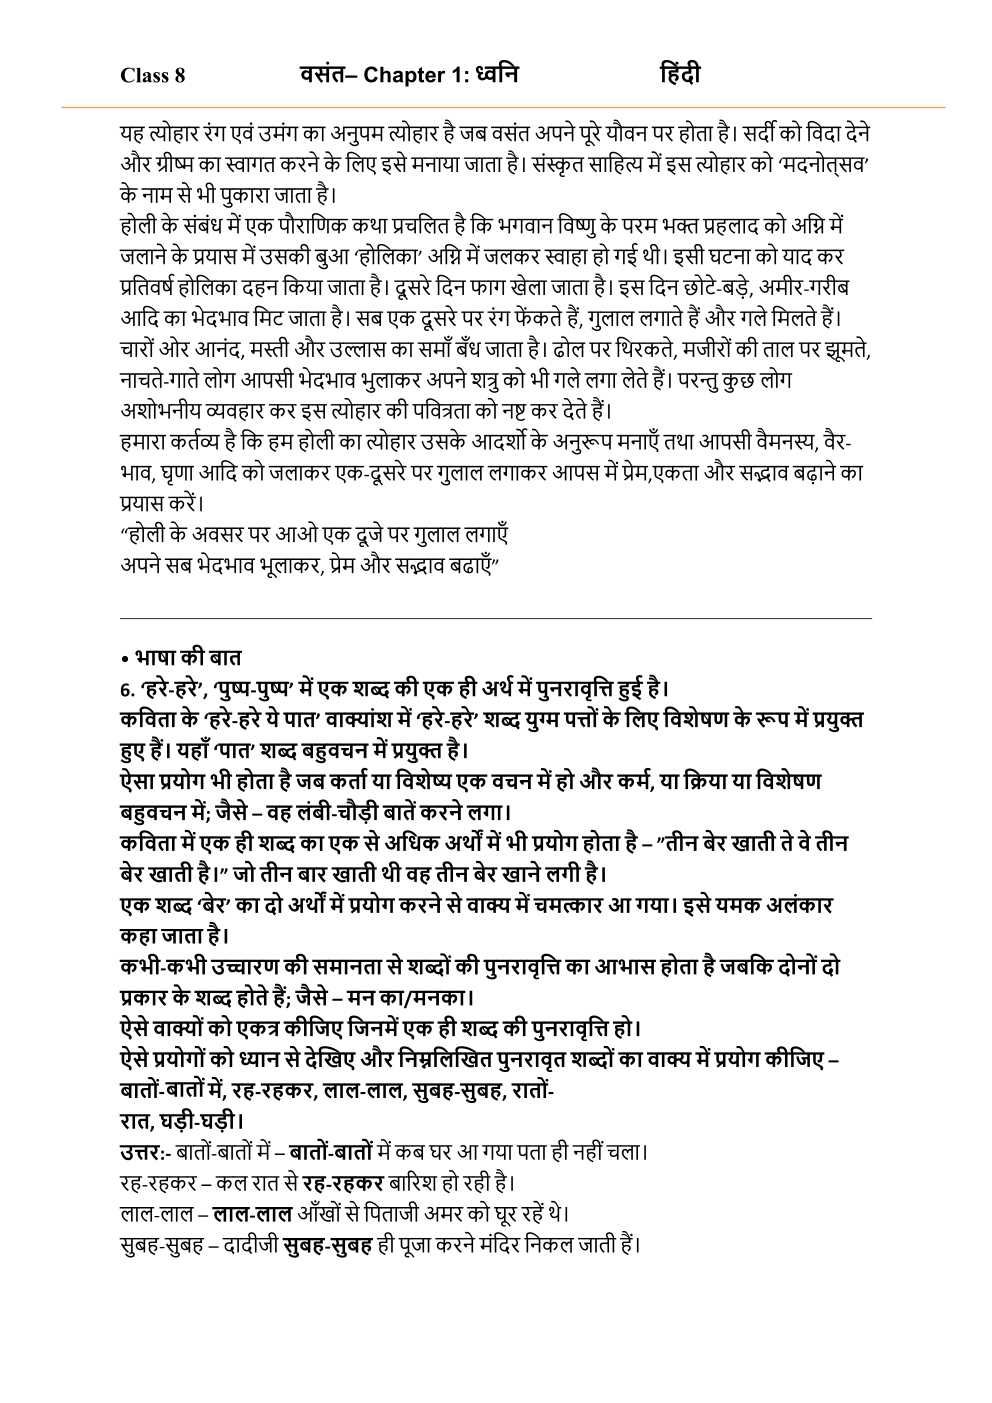 NCERT Solutions For Class 8 Hindi Vasant Chapter 1